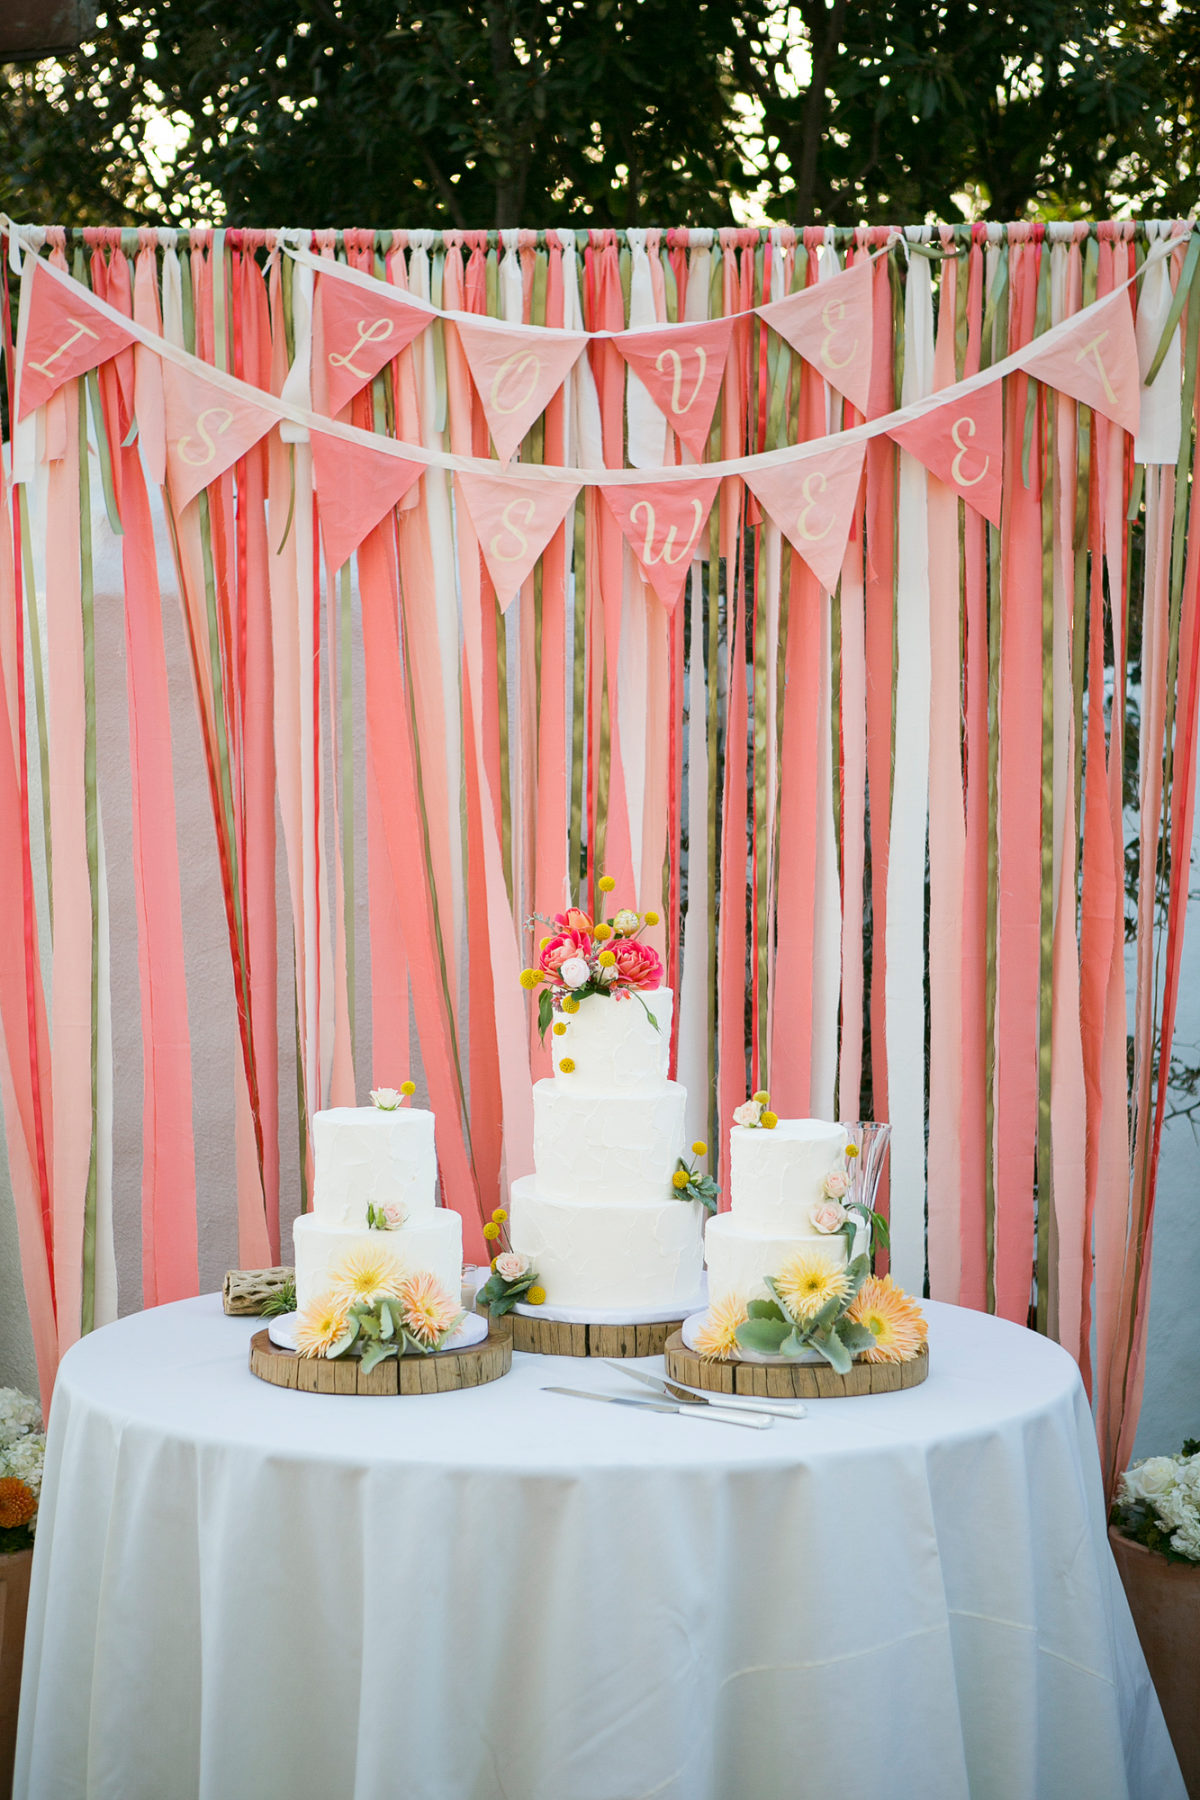 Living Coral wedding decor inspiration: Dessert Table Backdrop. Check out these amazing 2019 Pantone Color of the Year Wedding Ideas // mysweetengagement.com